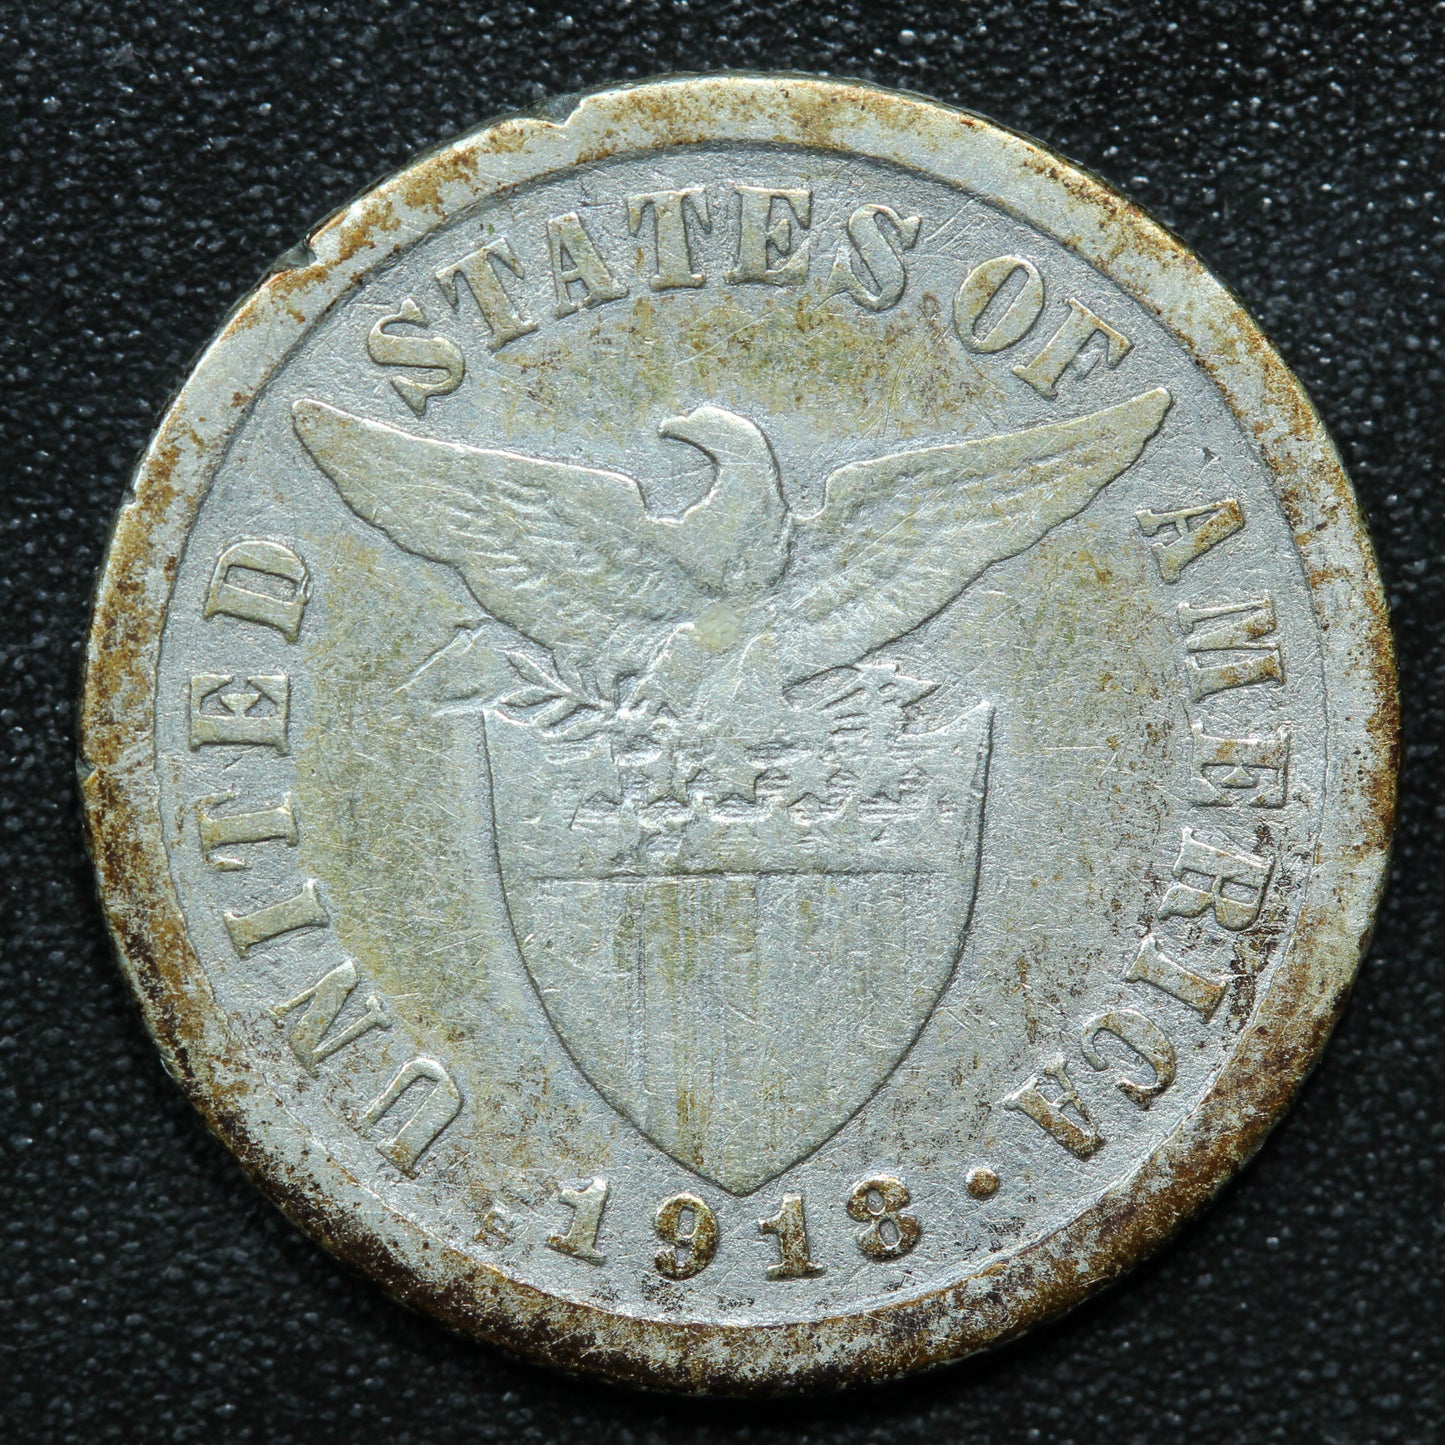 1918 10 Centavos Philippines Silver Coin.  75% Silver Coinage